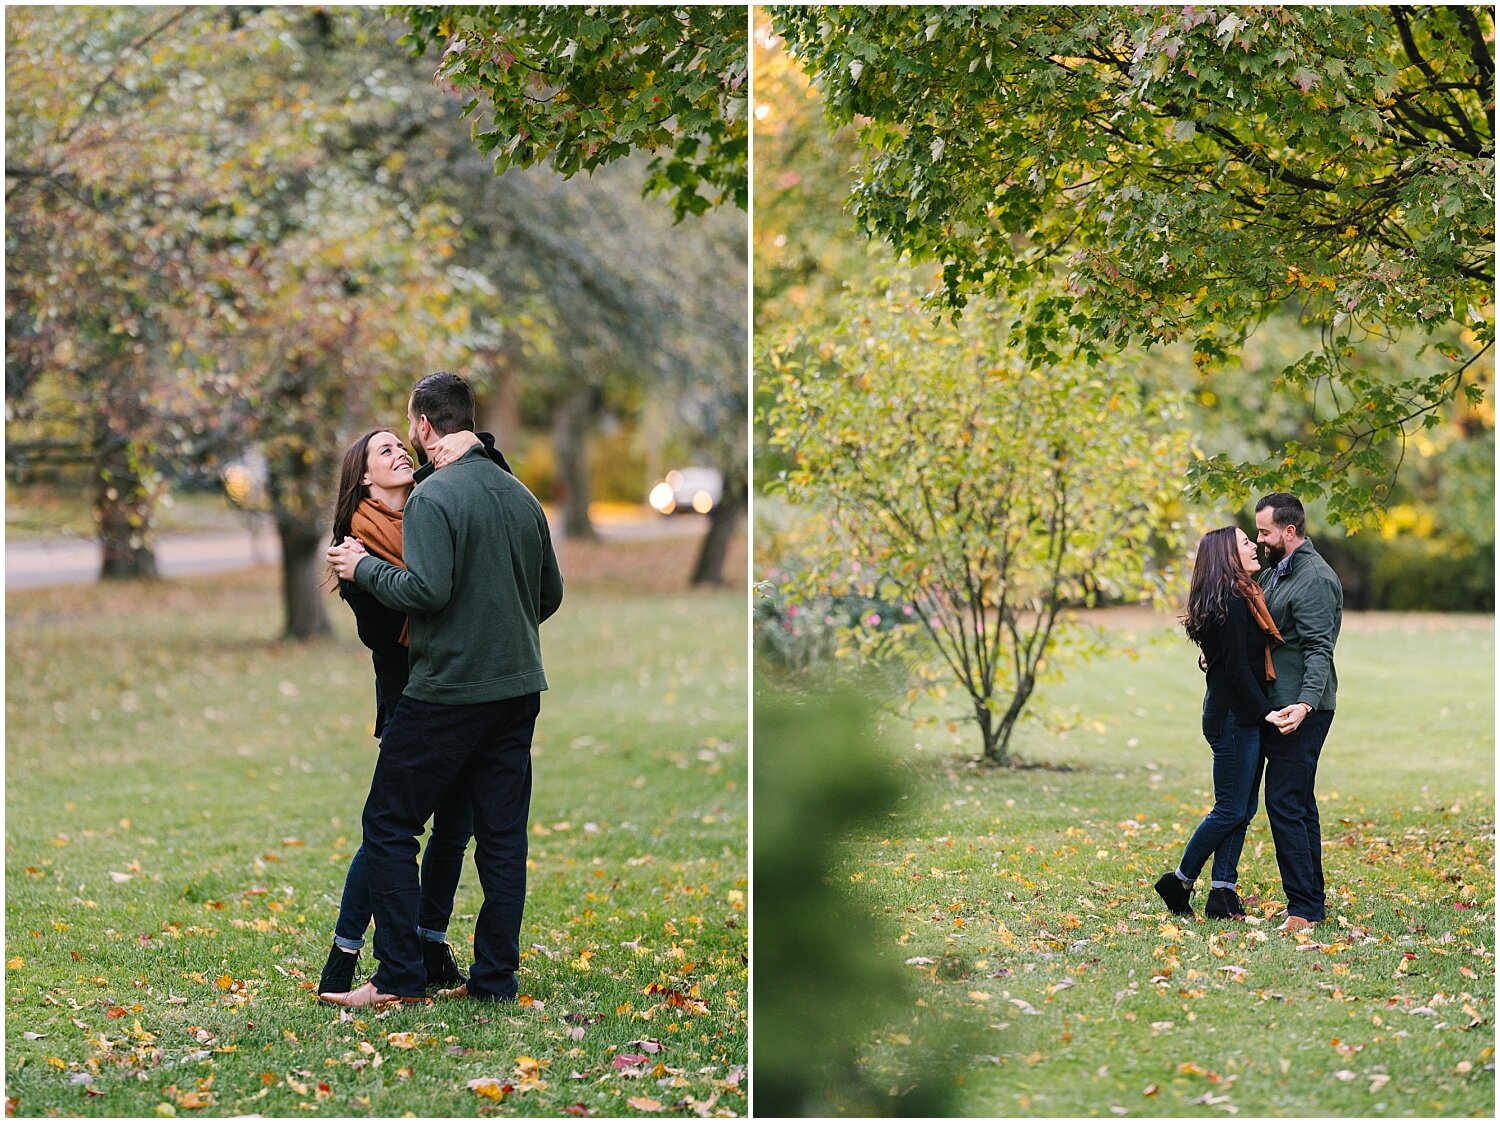 living+roots+wine+engagement+session+rochester+ny+wedding+photographer (21).jpg